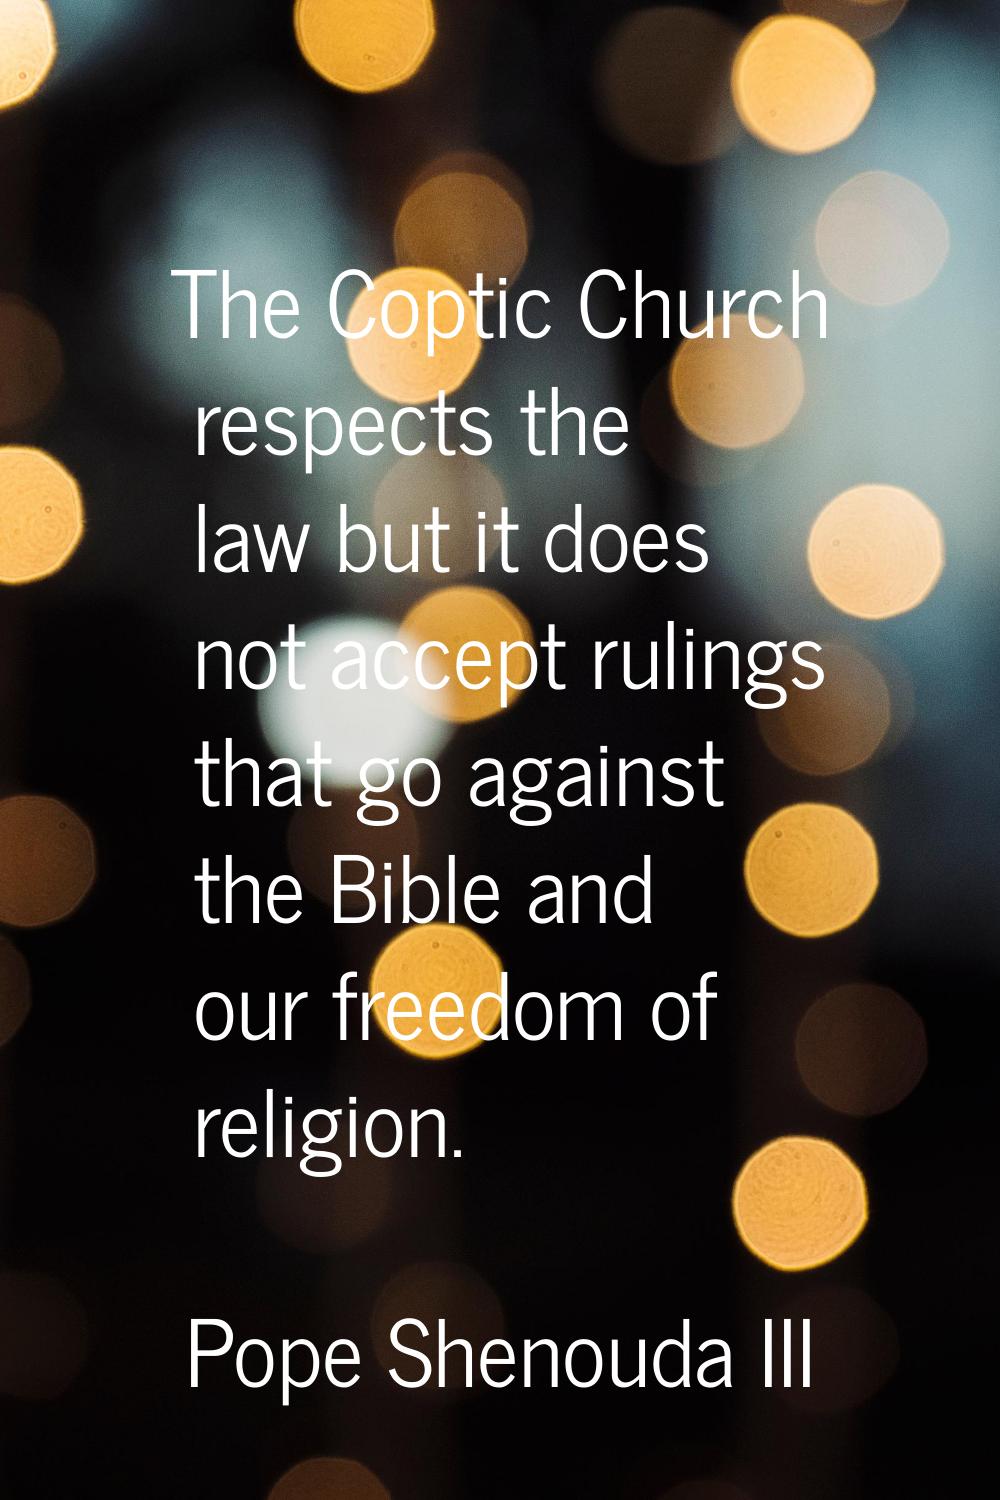 The Coptic Church respects the law but it does not accept rulings that go against the Bible and our